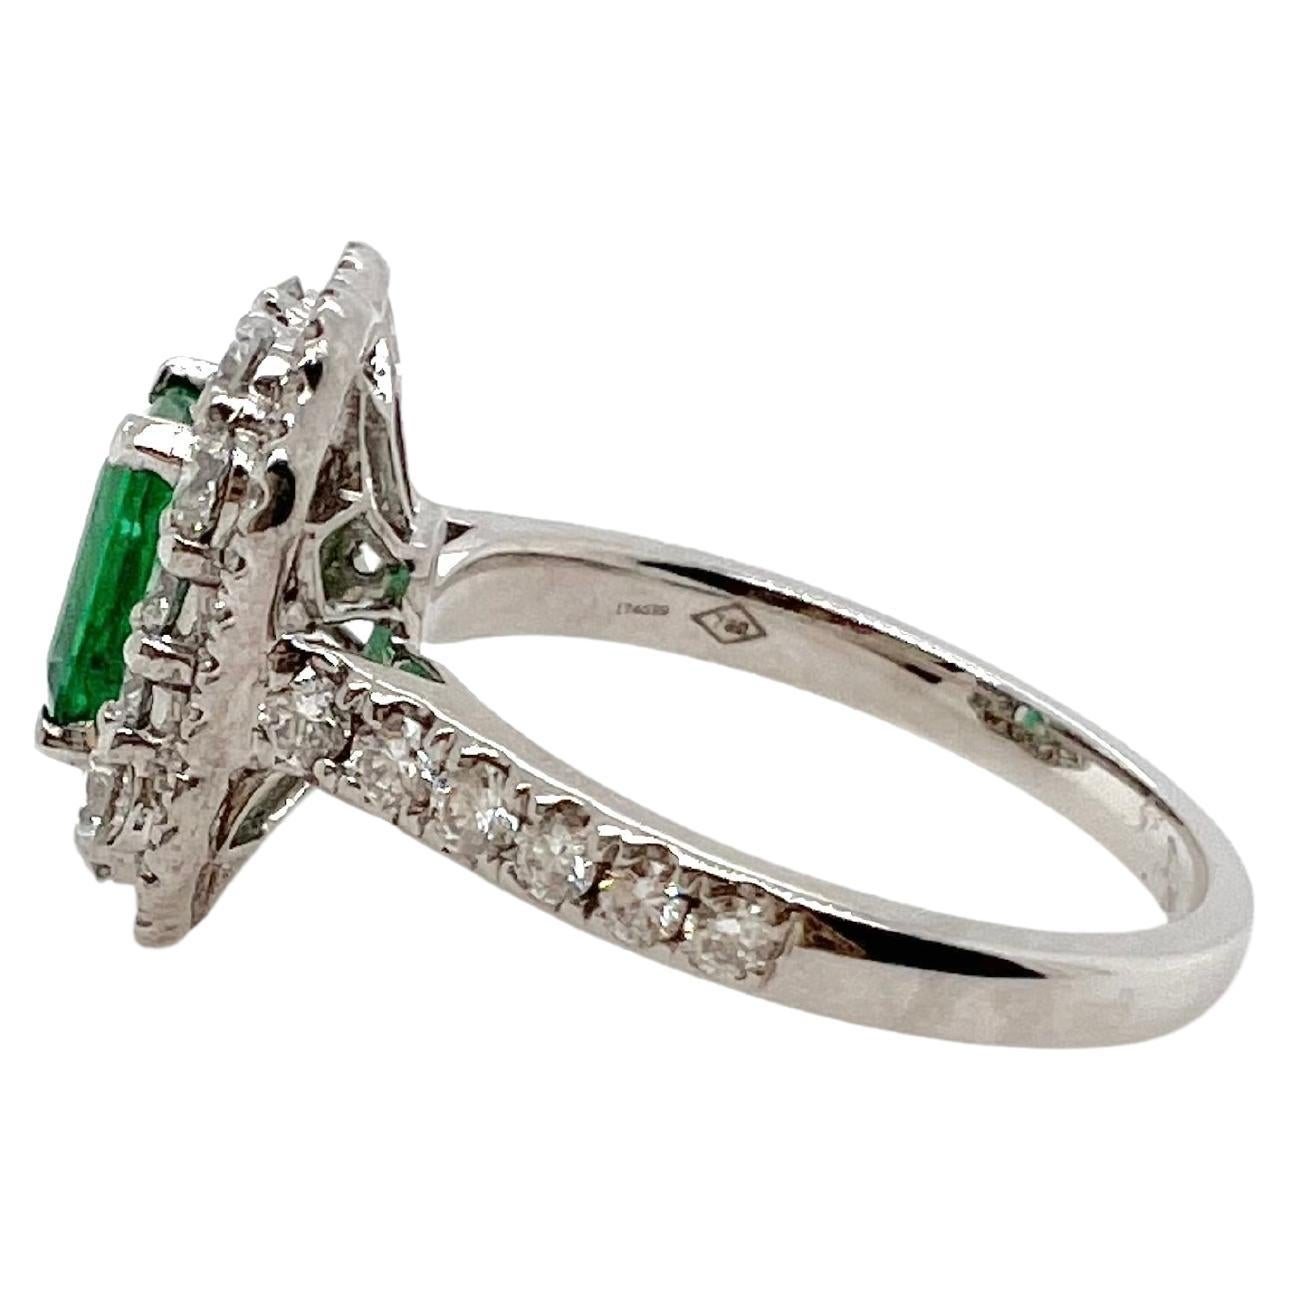 This classic emerald ring is surrounded by brilliant round diamonds in this beautiful 18k white gold mounting.  The white, dazzling diamonds contrast the vibrant emerald!  This is a must-have for anyone's jewelry collection.


Size: 6.25 / can be